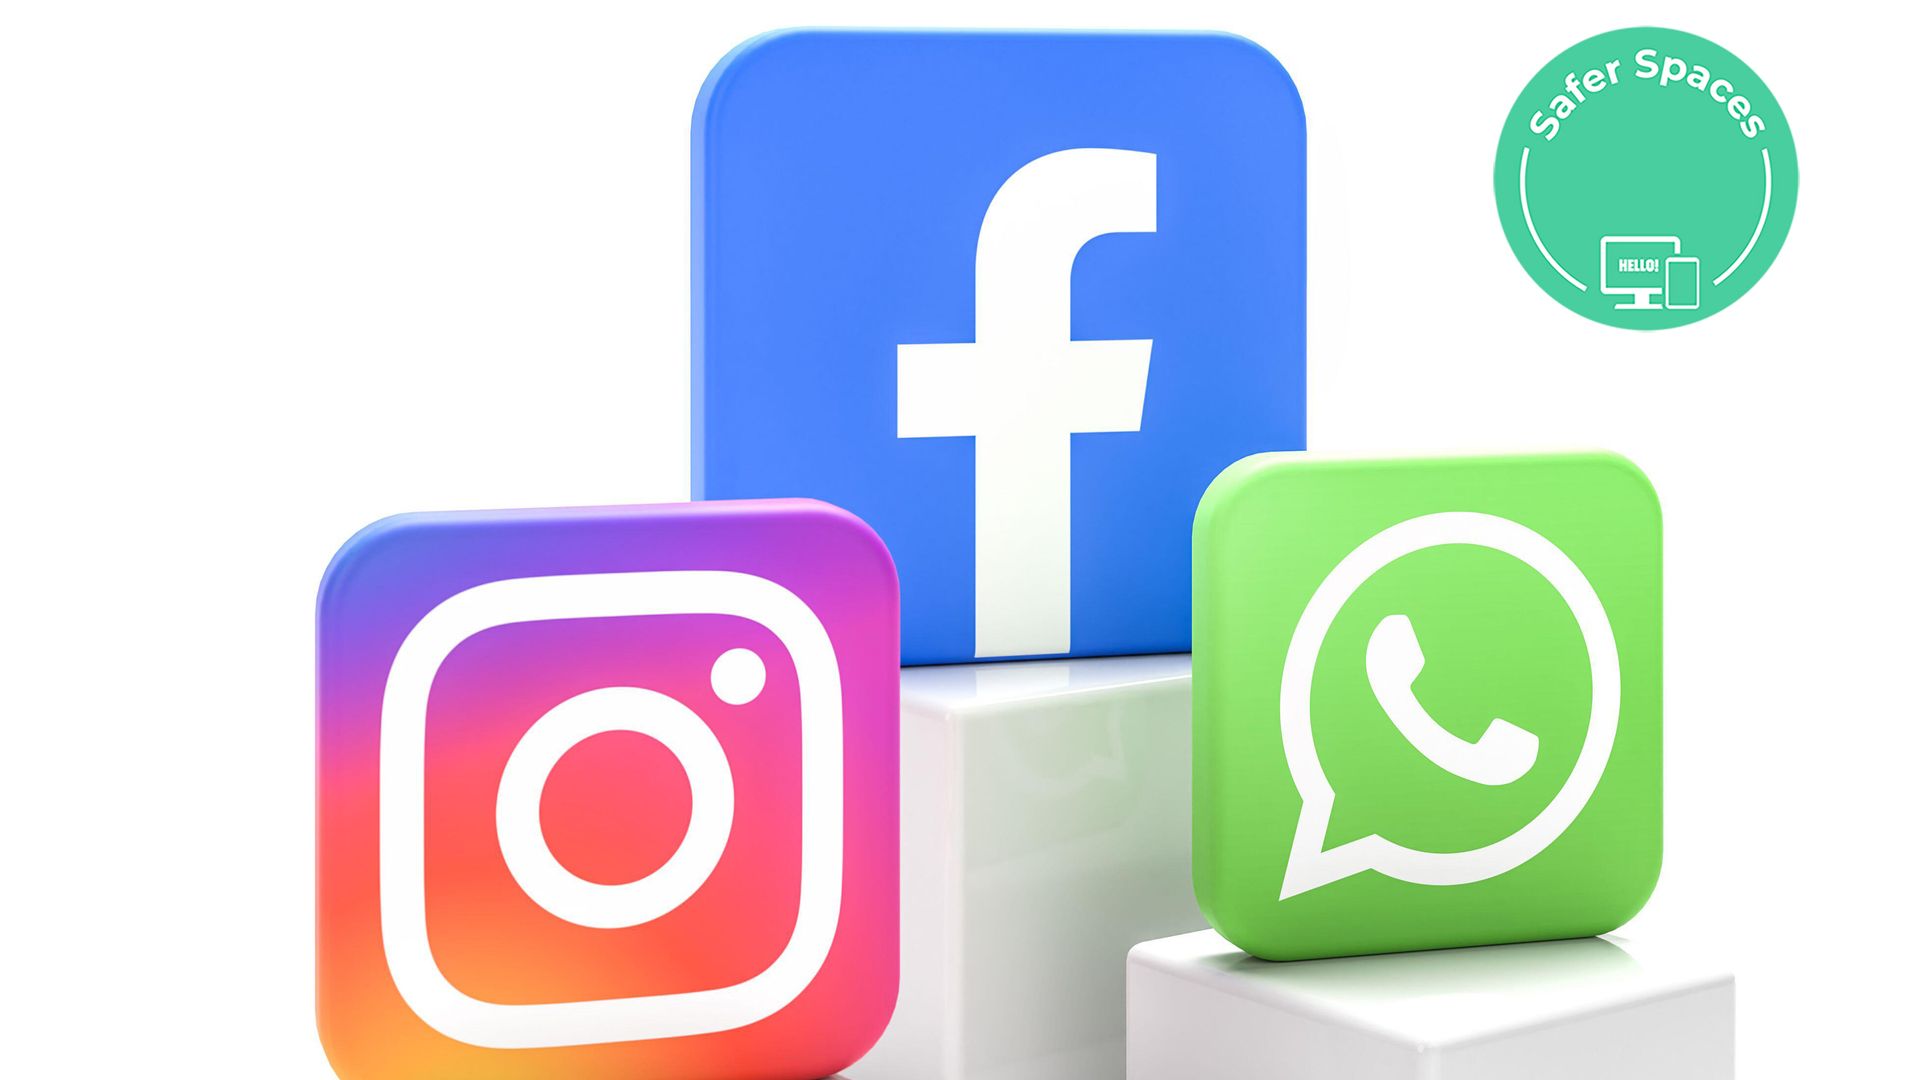  Logos of the Social Media companies Facebook, Instagram and Whatsapp. 